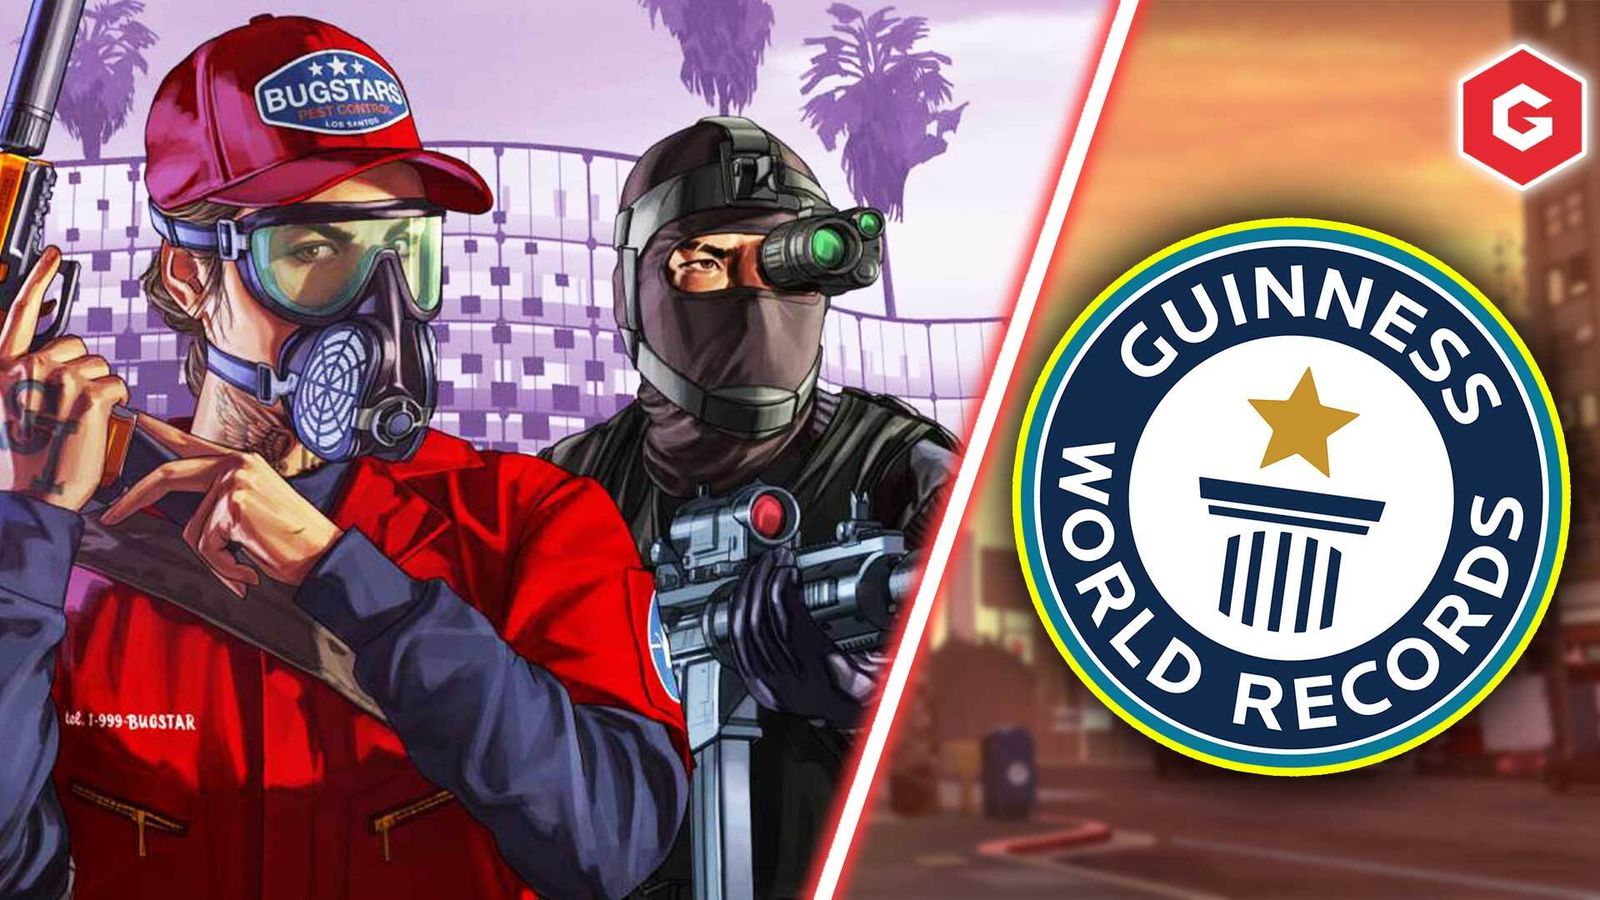 An image of the Guinness World Records logo in GTA Online.